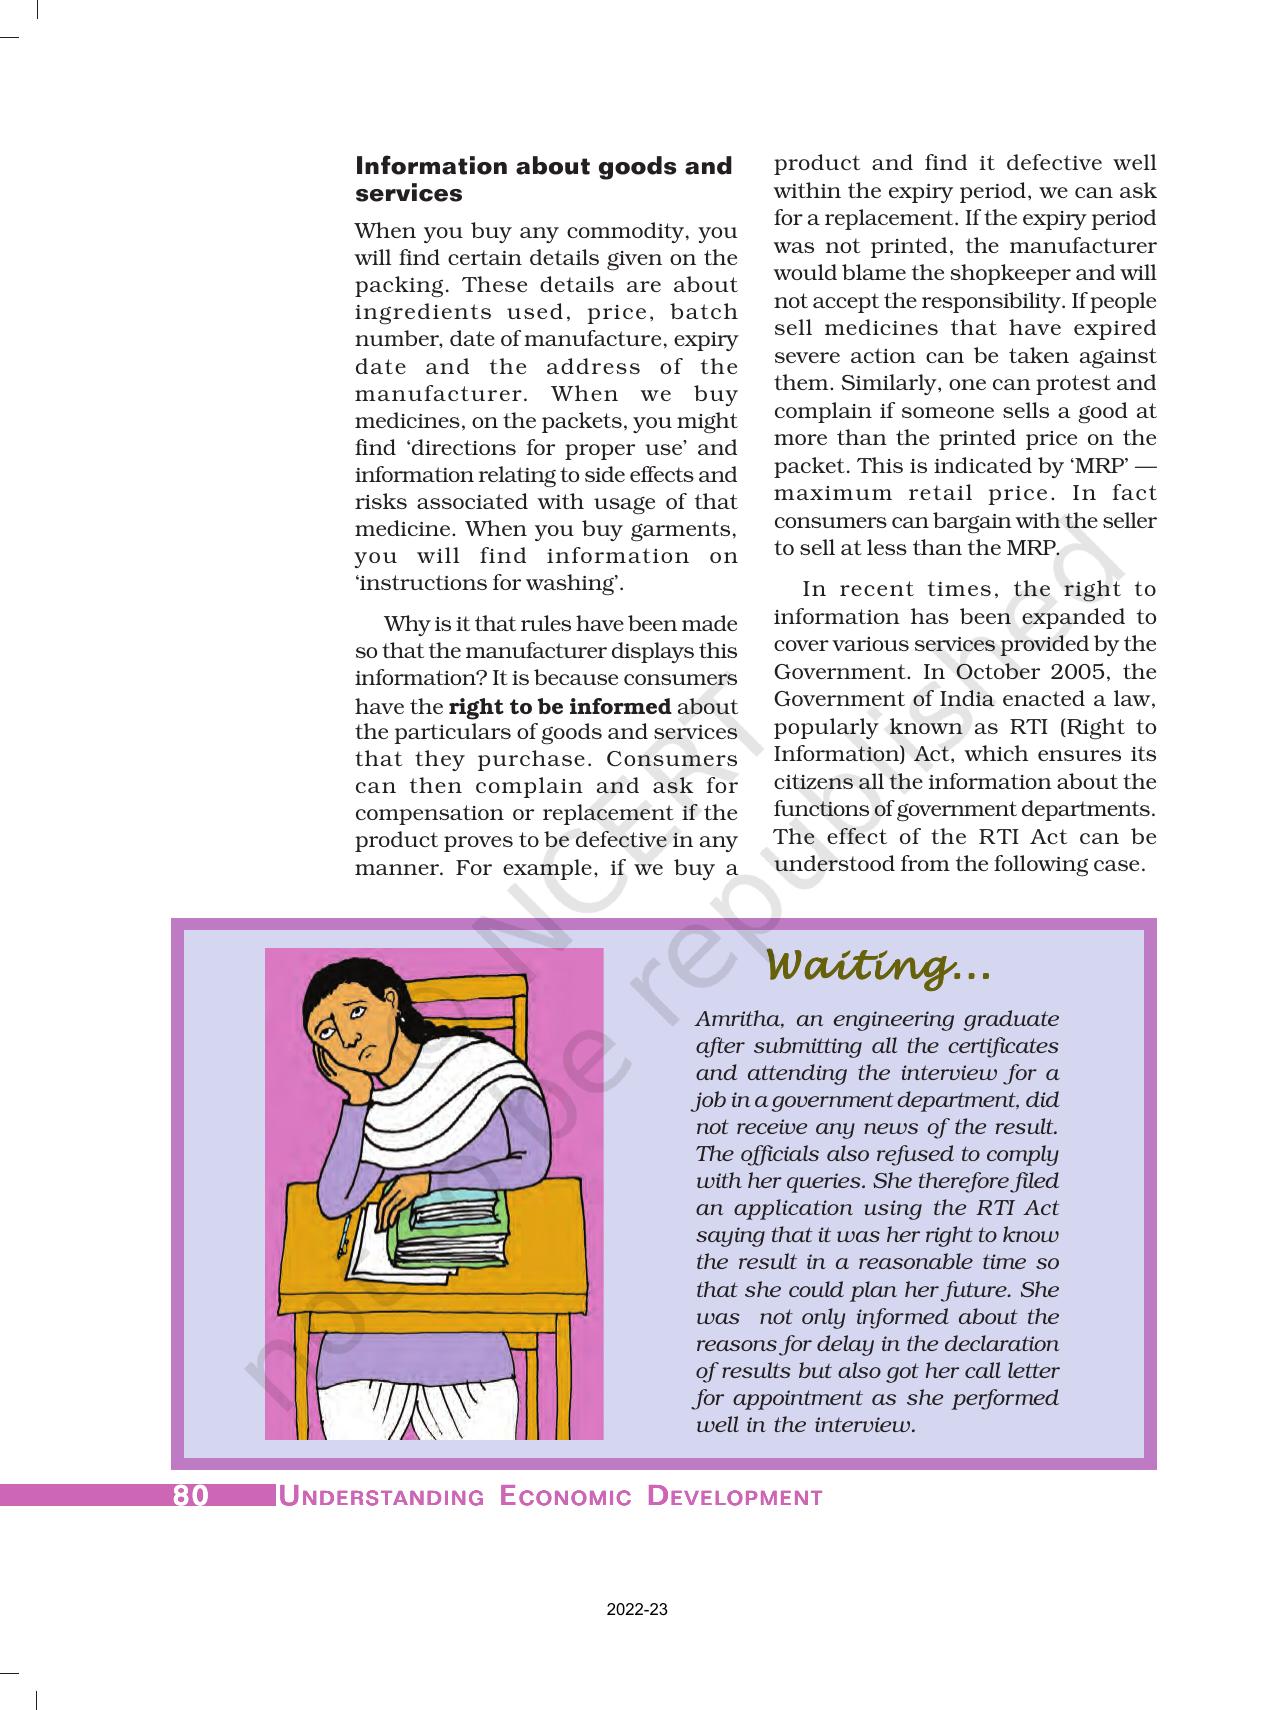 NCERT Book for Class 10 Economics Chapter 5 Consumer Rights - Page 7